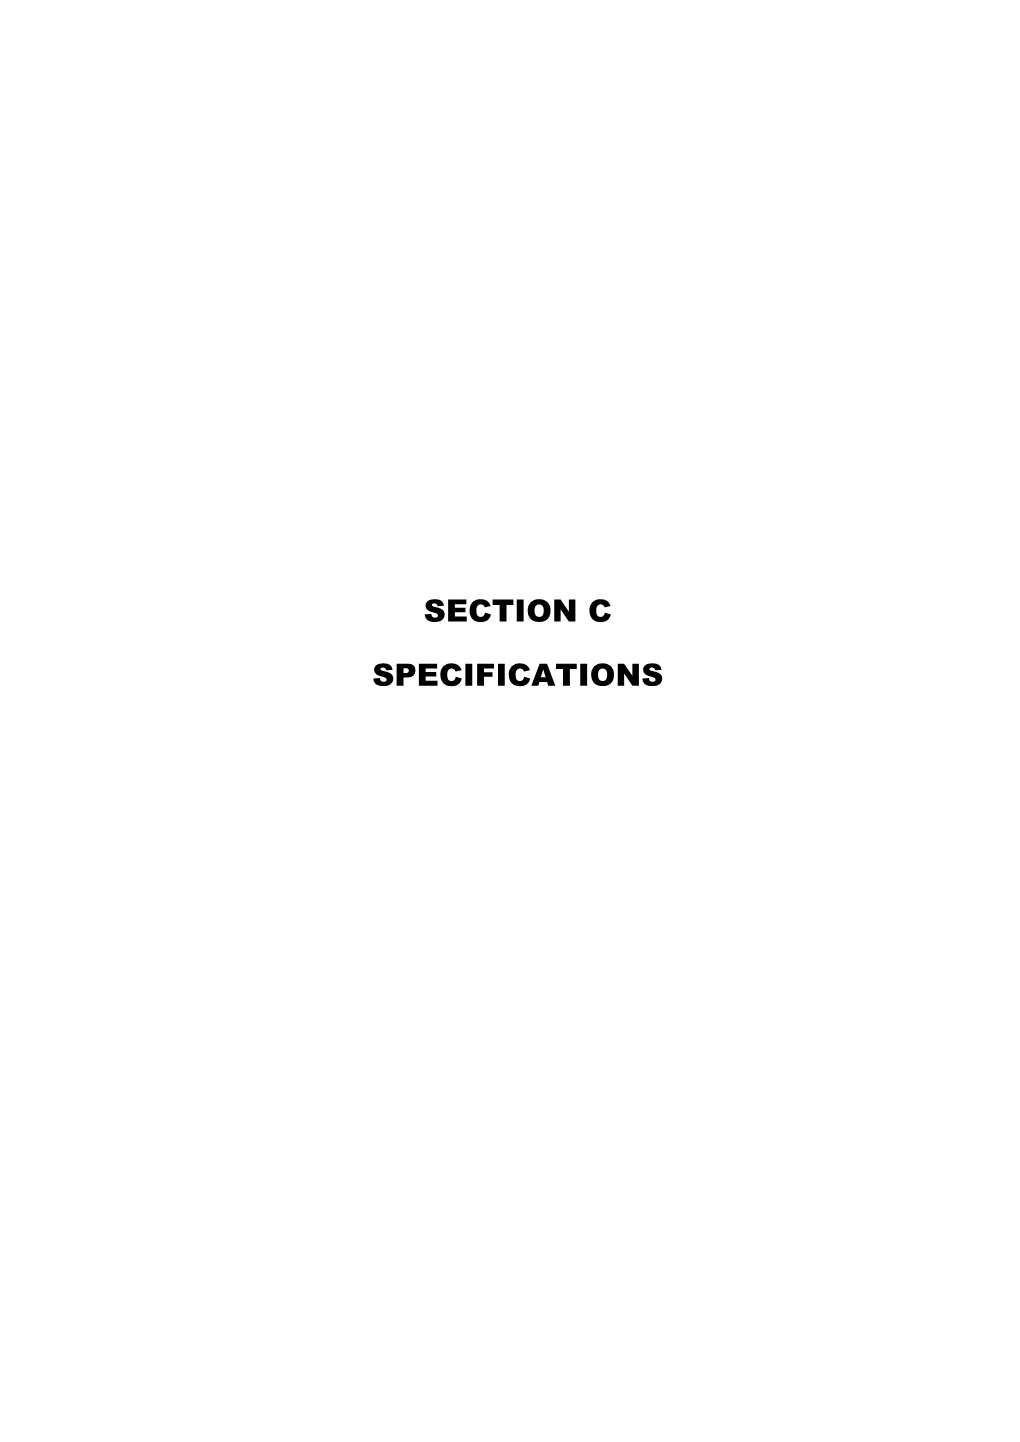 Section C Specifications